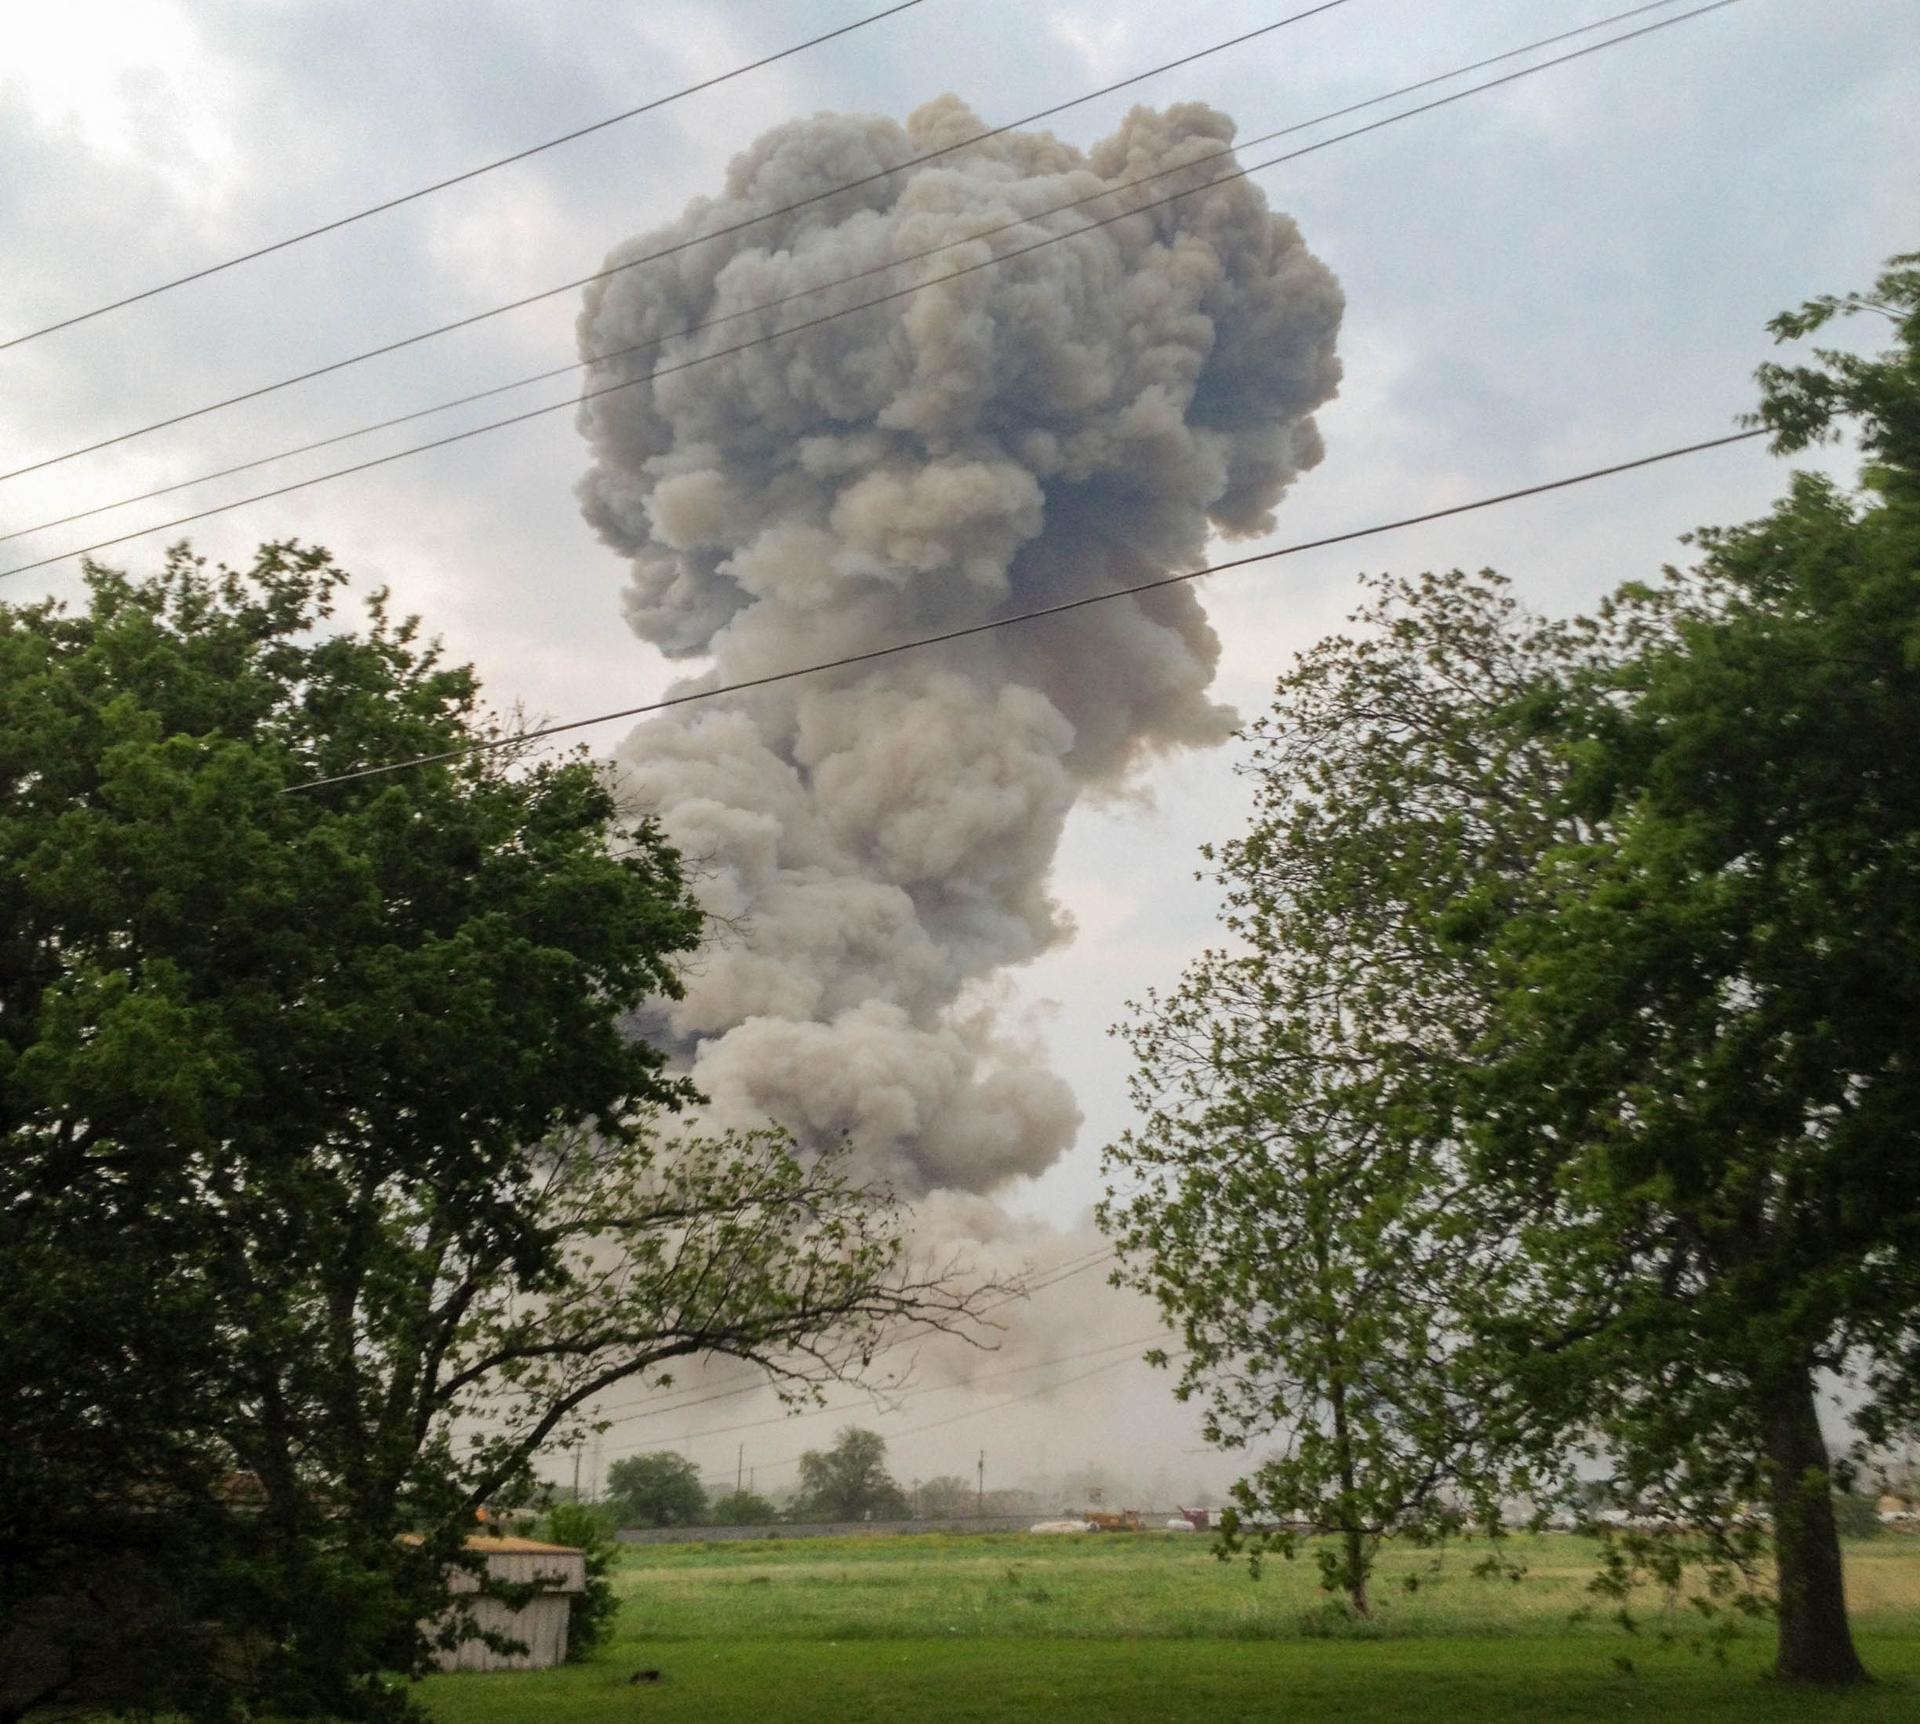 A plume of smoke is seen in the distance following an explosion.